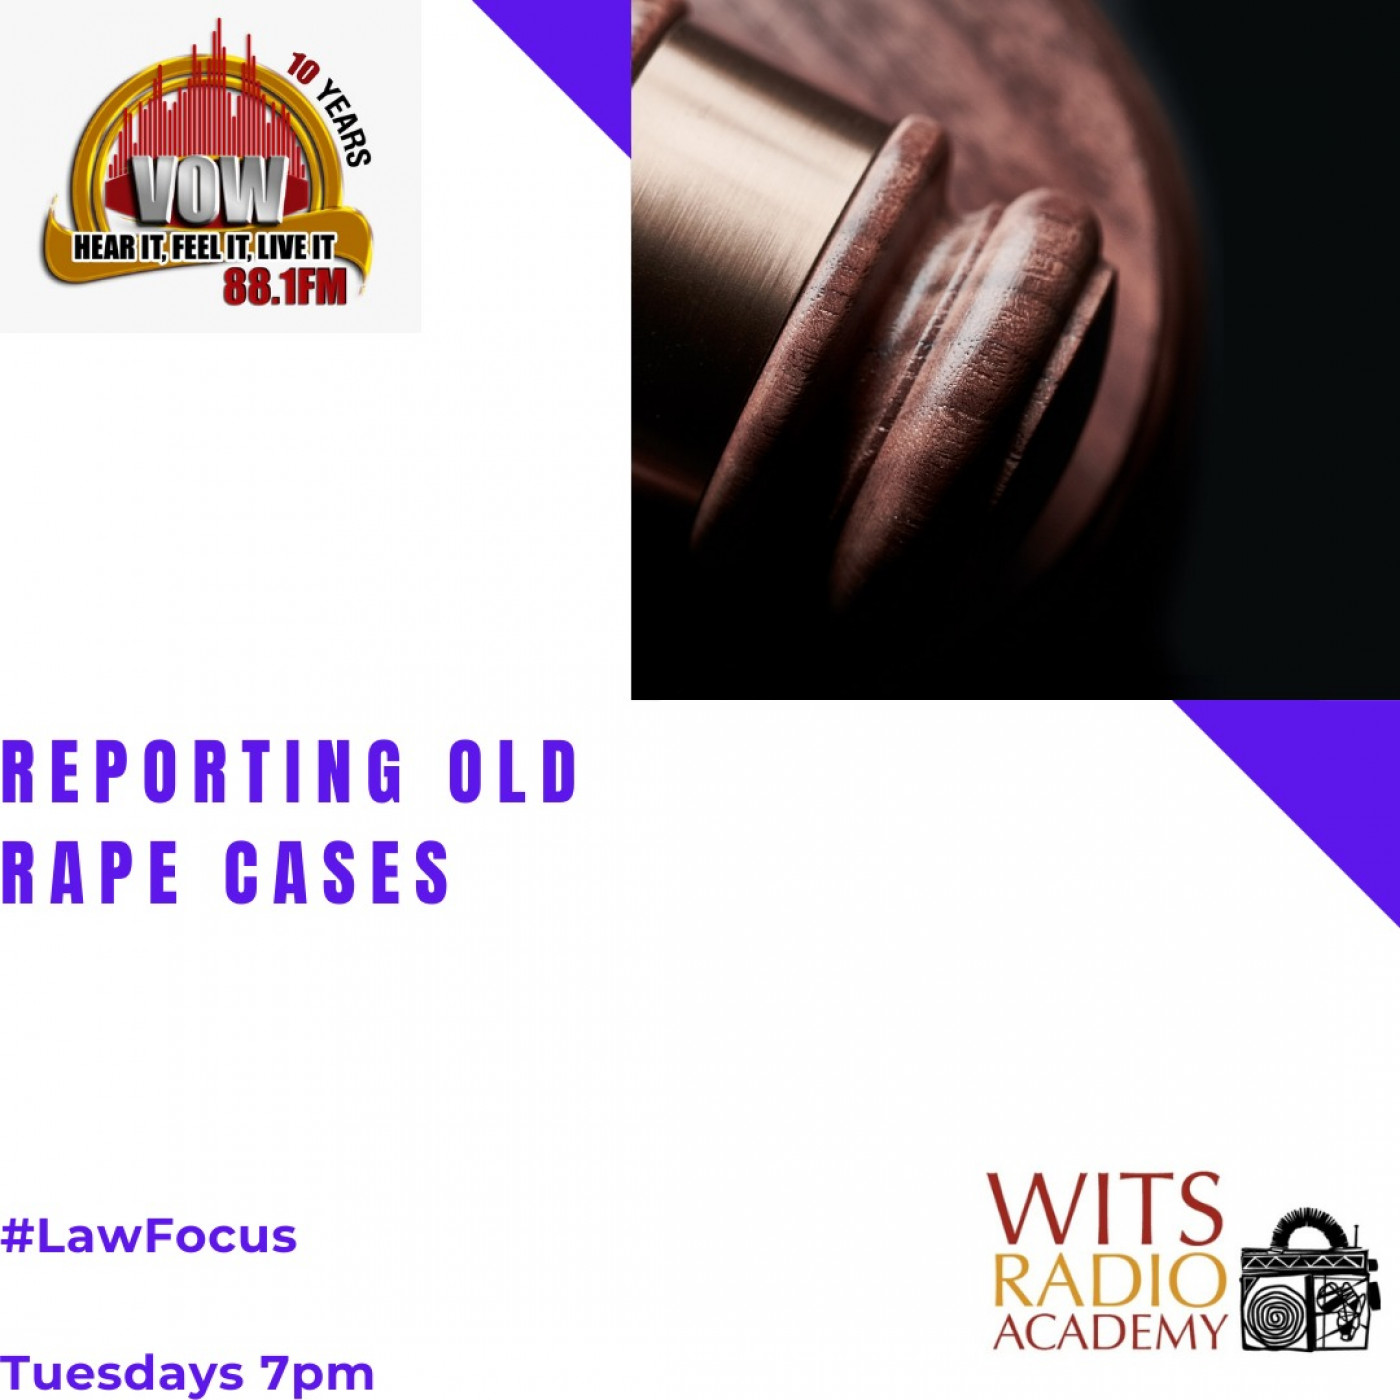 Law Focus - Reporting Old Rape Cases